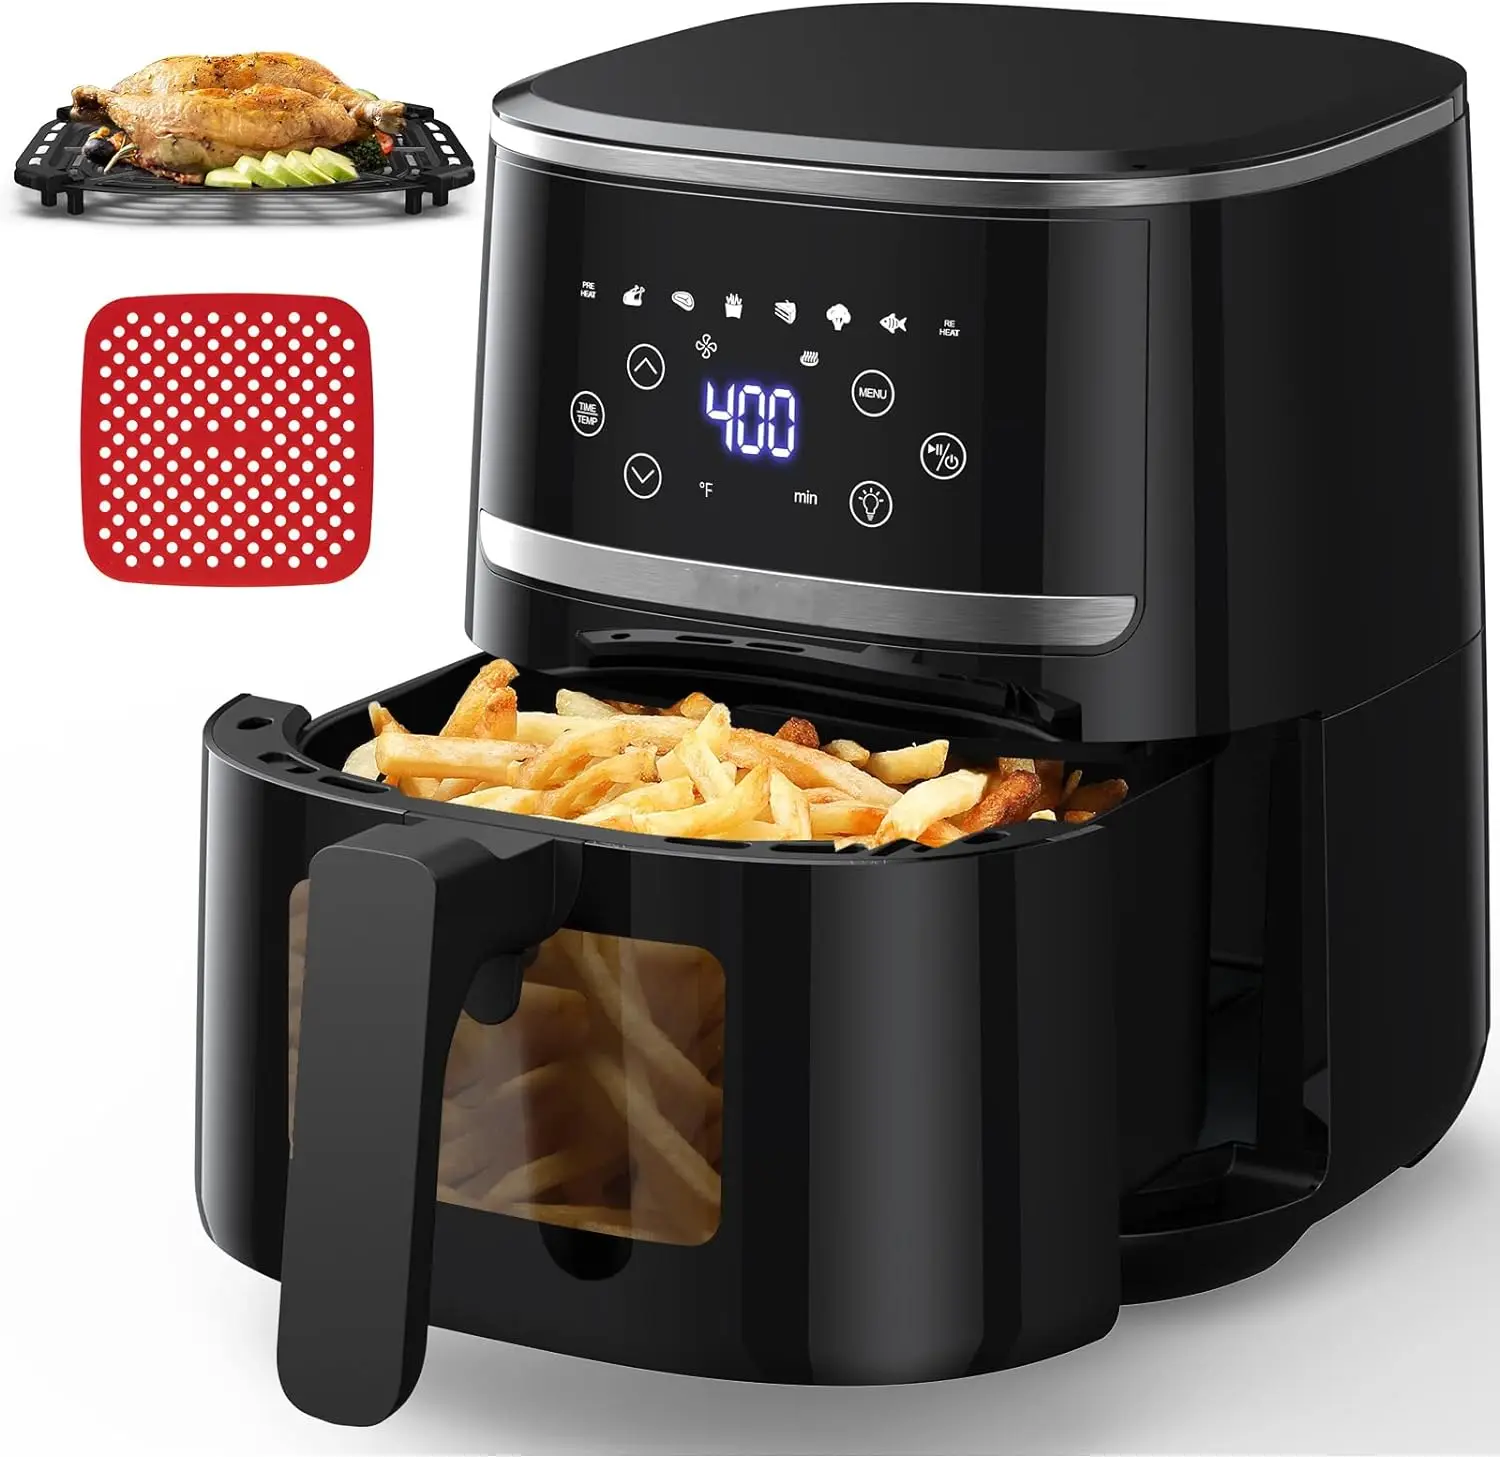 

Fryer Oven 5 Qt Large Oil Free Touch Screen 1500W Mini Oven Combo with 7 Accessories, One-Touch Digital Controls, Nonstick Silic